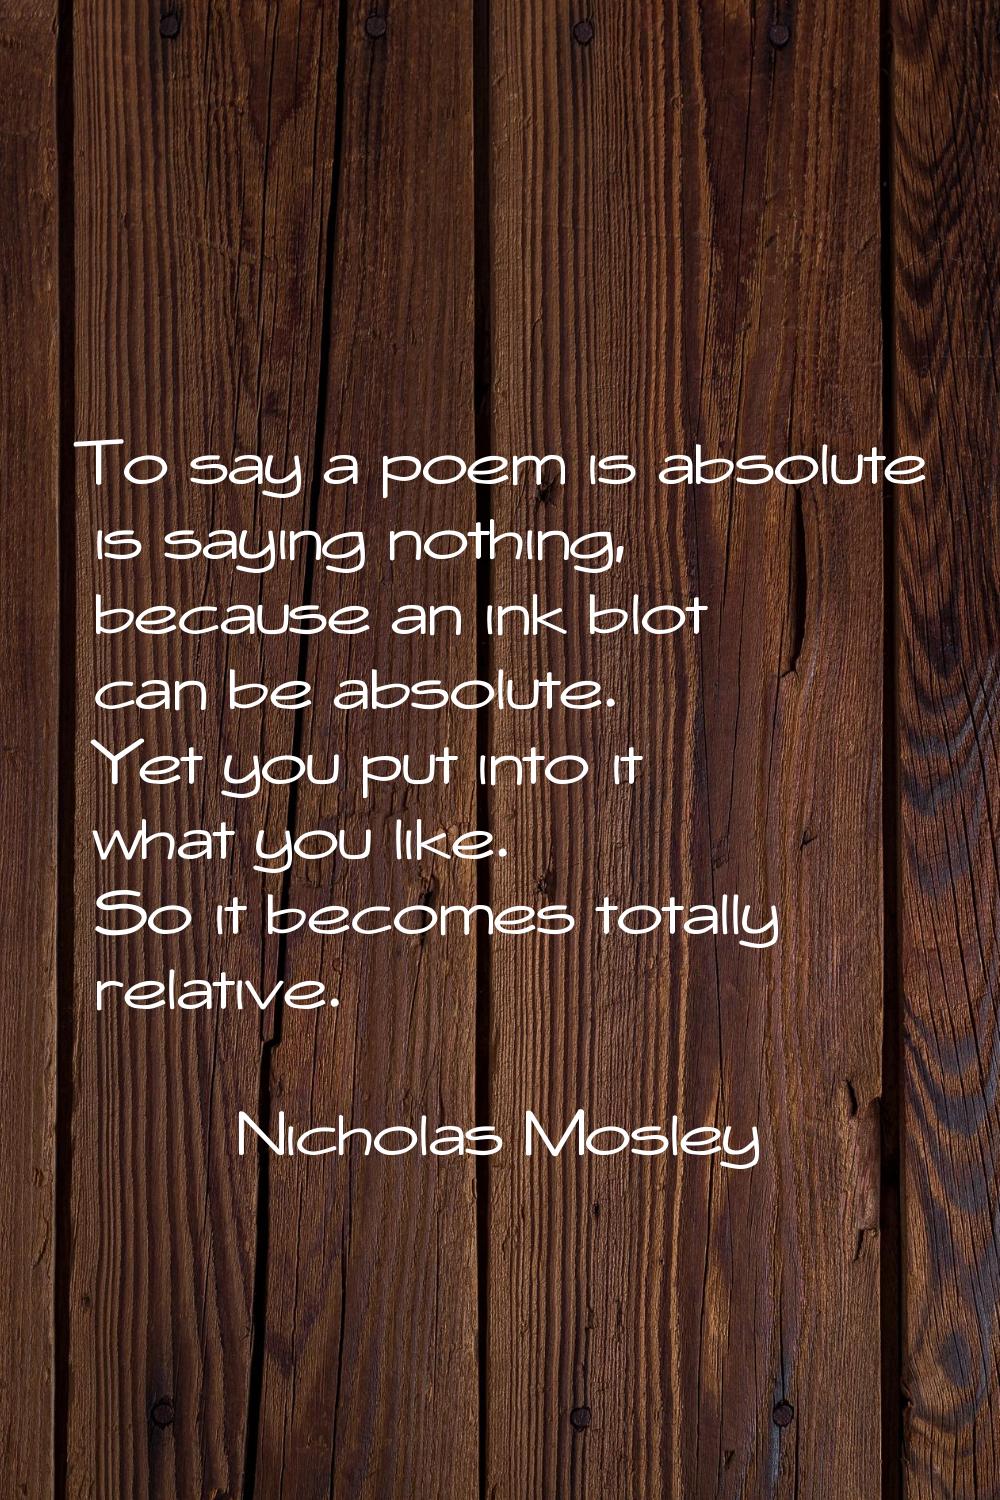 To say a poem is absolute is saying nothing, because an ink blot can be absolute. Yet you put into 